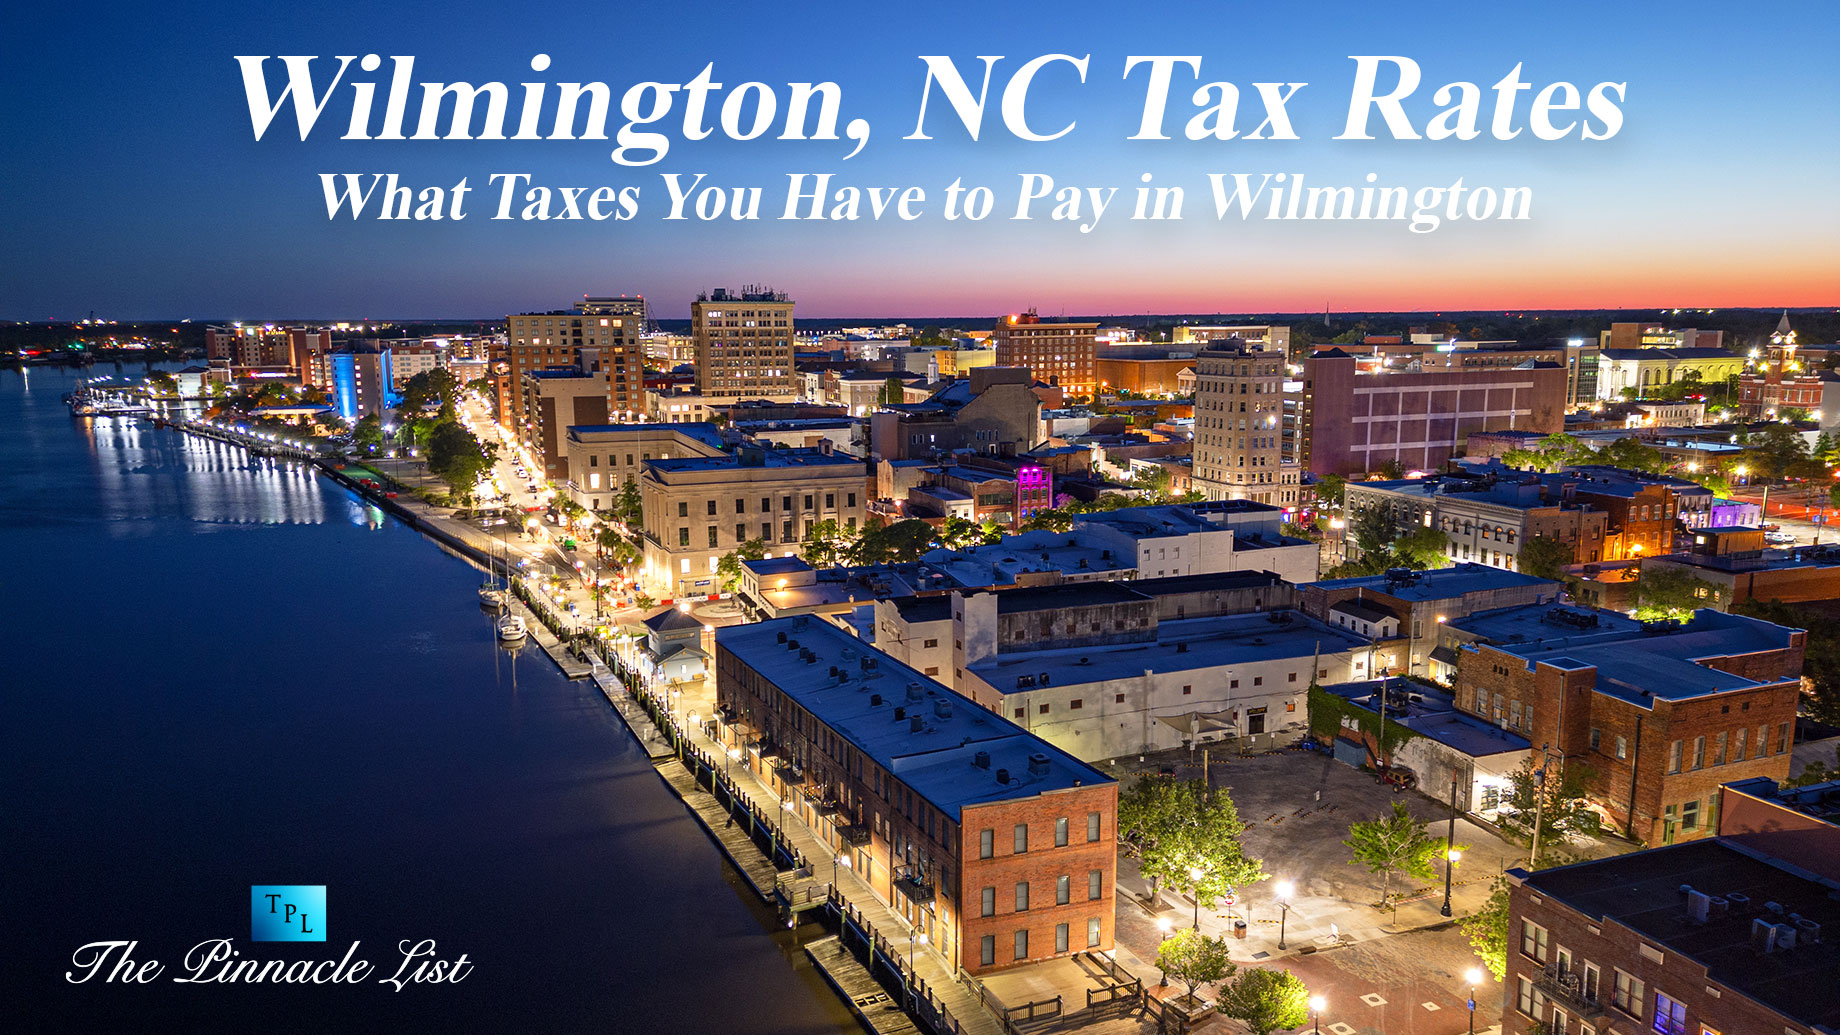 Wilmington, NC Tax Rates: What Taxes You Have to Pay in Wilmington